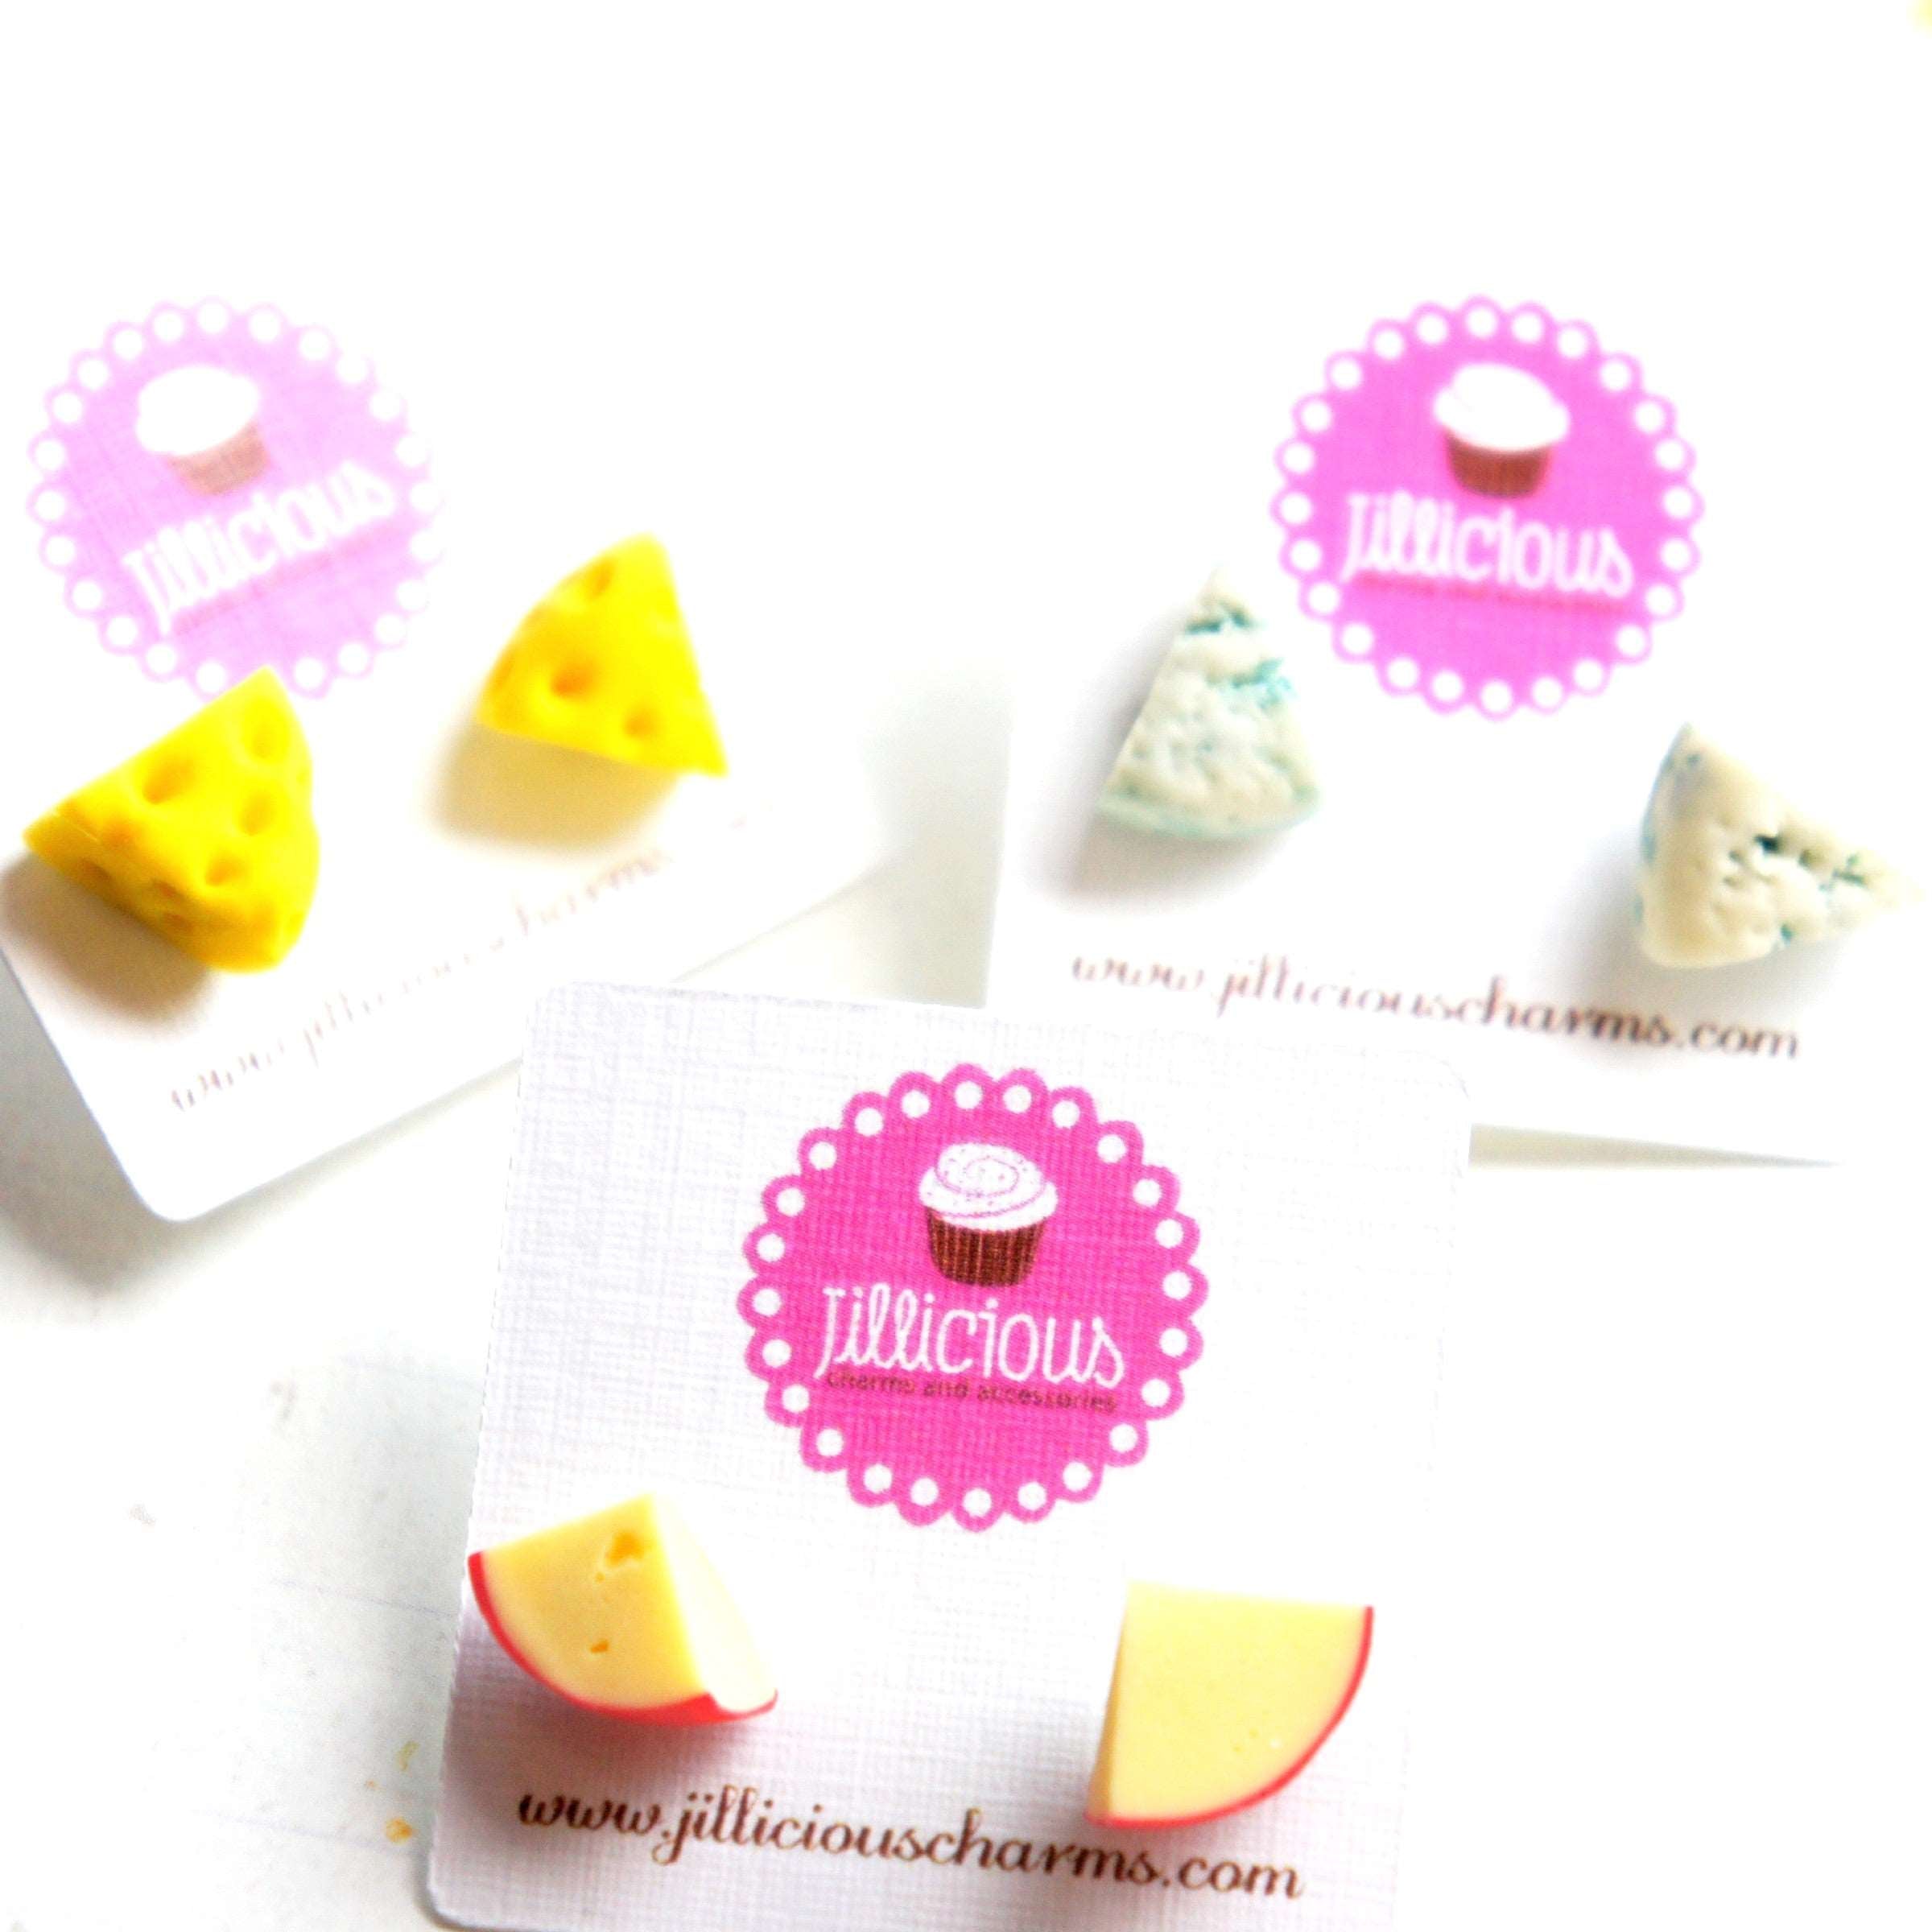 Cheese Slices Stud Earrings - Jillicious charms and accessories